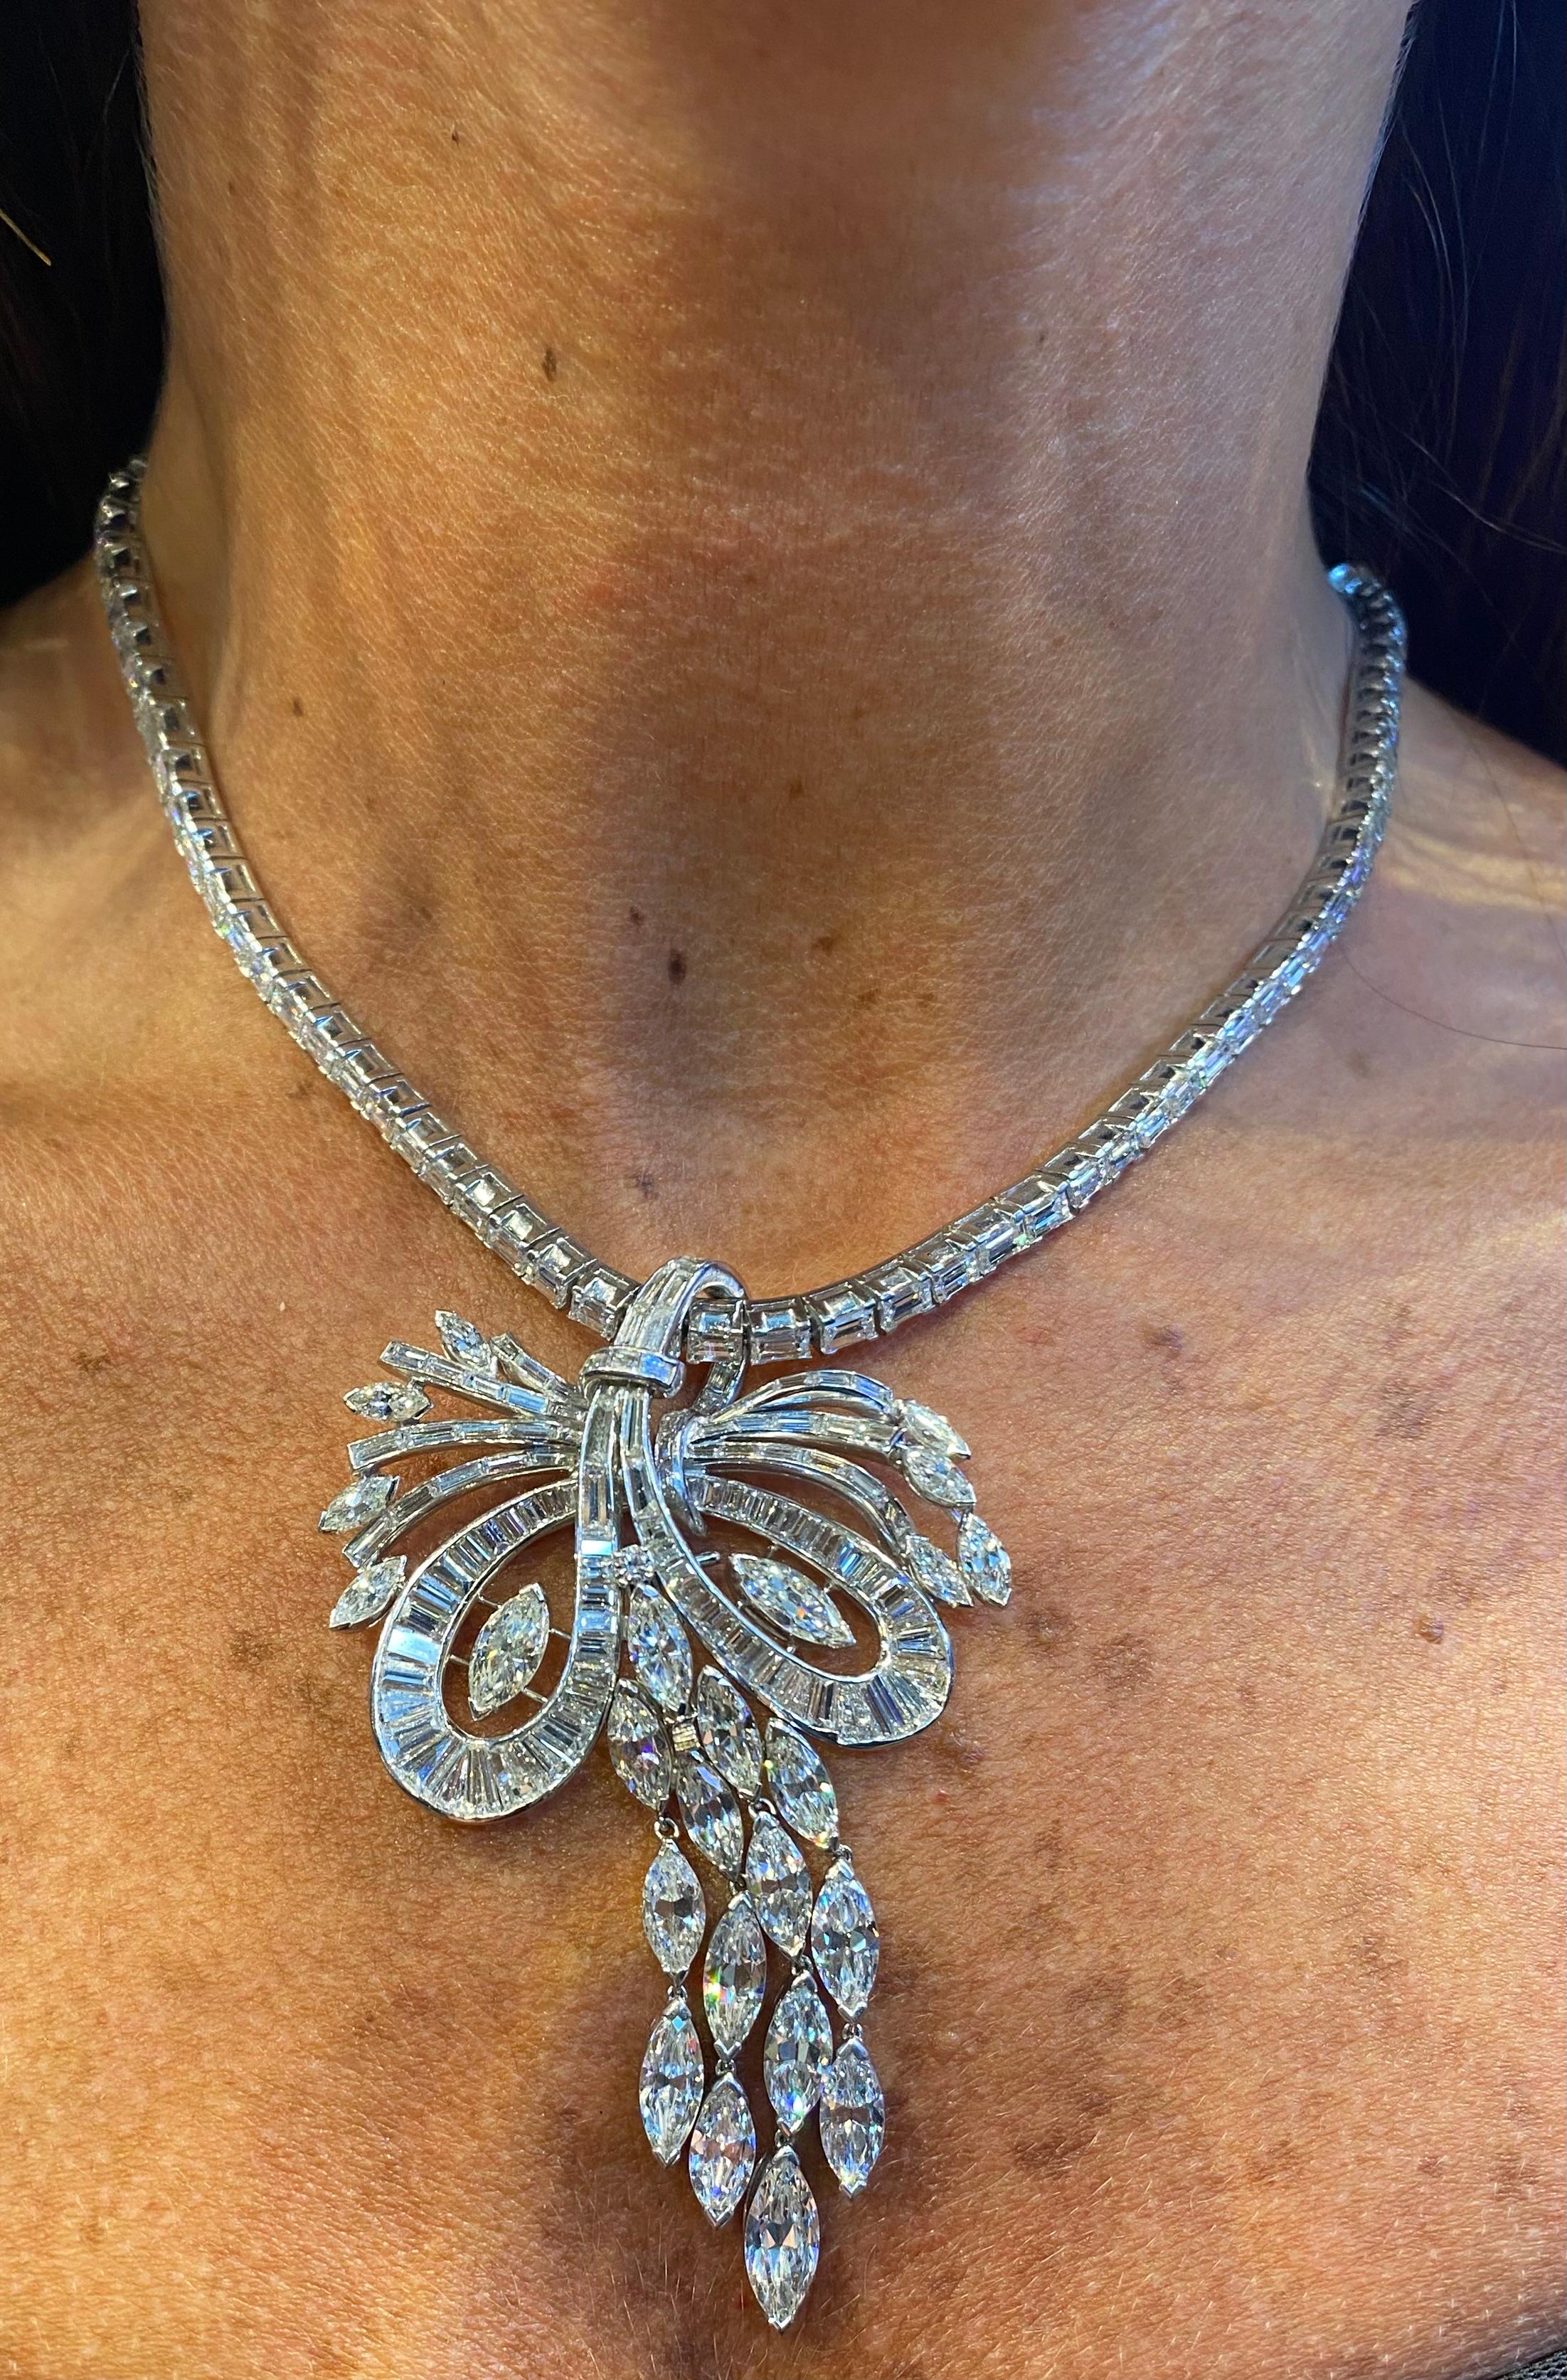 Diamond Pendant Necklace In Excellent Condition For Sale In New York, NY